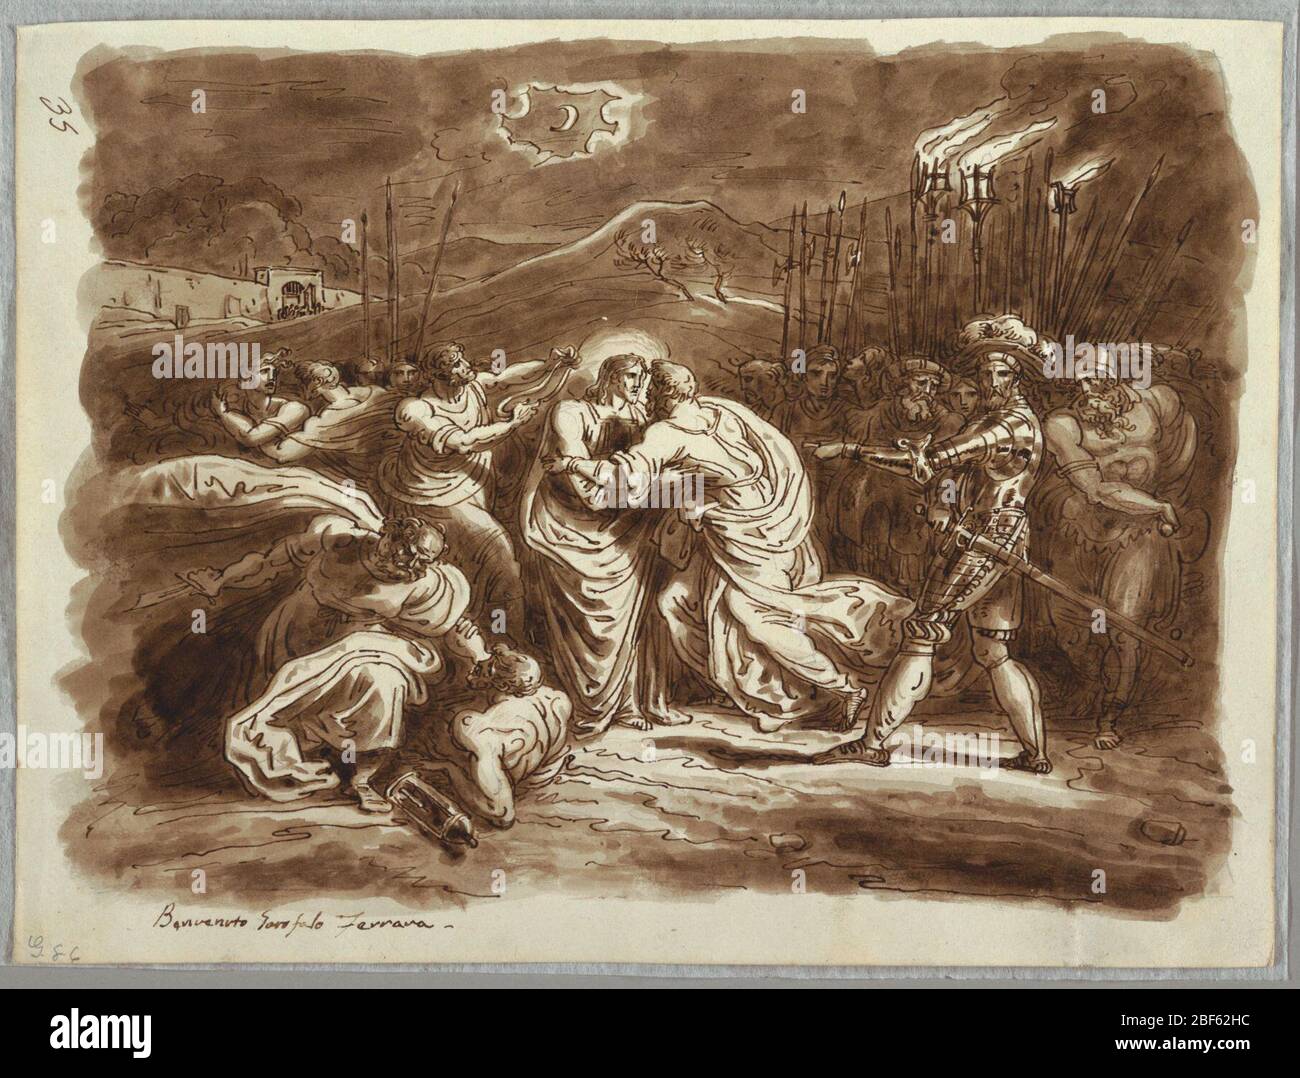 The Betrayal of Christ. In nocturnal landscape with crescent moon, Judas gives kiss of betrayal to Christ at center. Military commander and soldiers at right, men struggling at left. Stock Photo